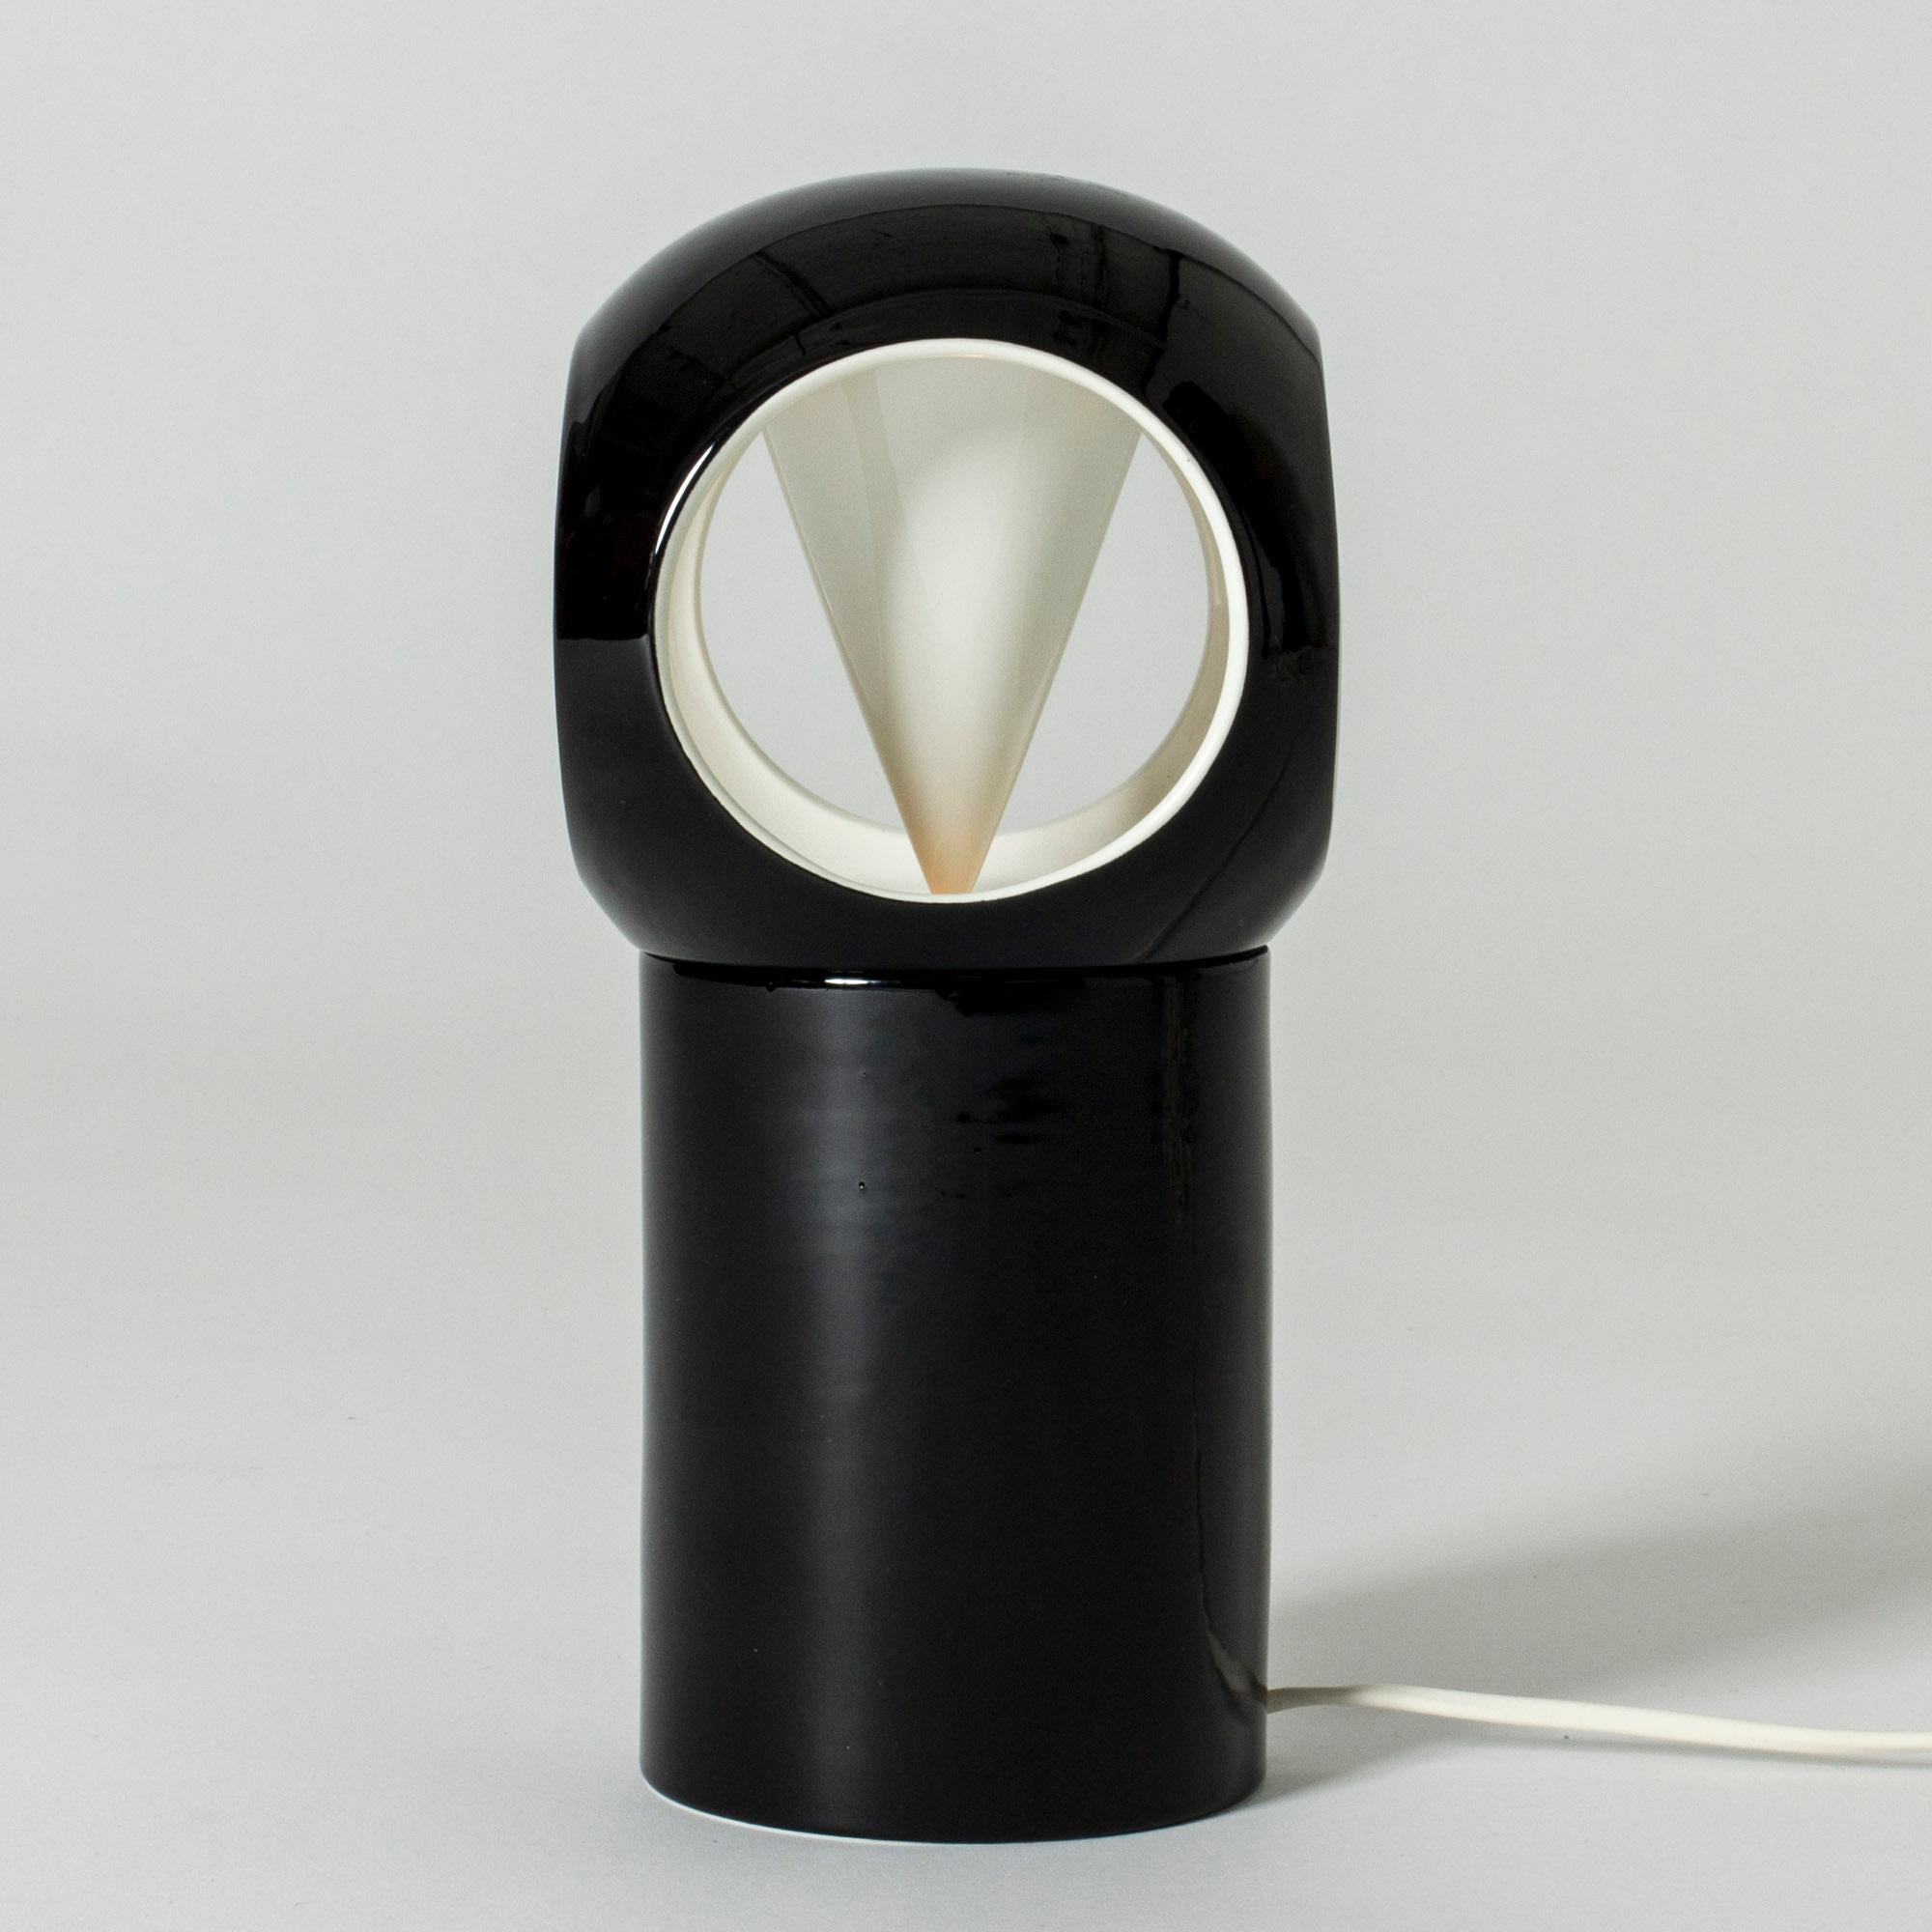 Striking table lamp by Carl-Harry Stålhane, made from stoneware. Glazed contrasting black and white. Looks different depending on angle, the openings in the shade give it an owl-like look.

Carl-Harry Stålhane was one of the stars among Swedish